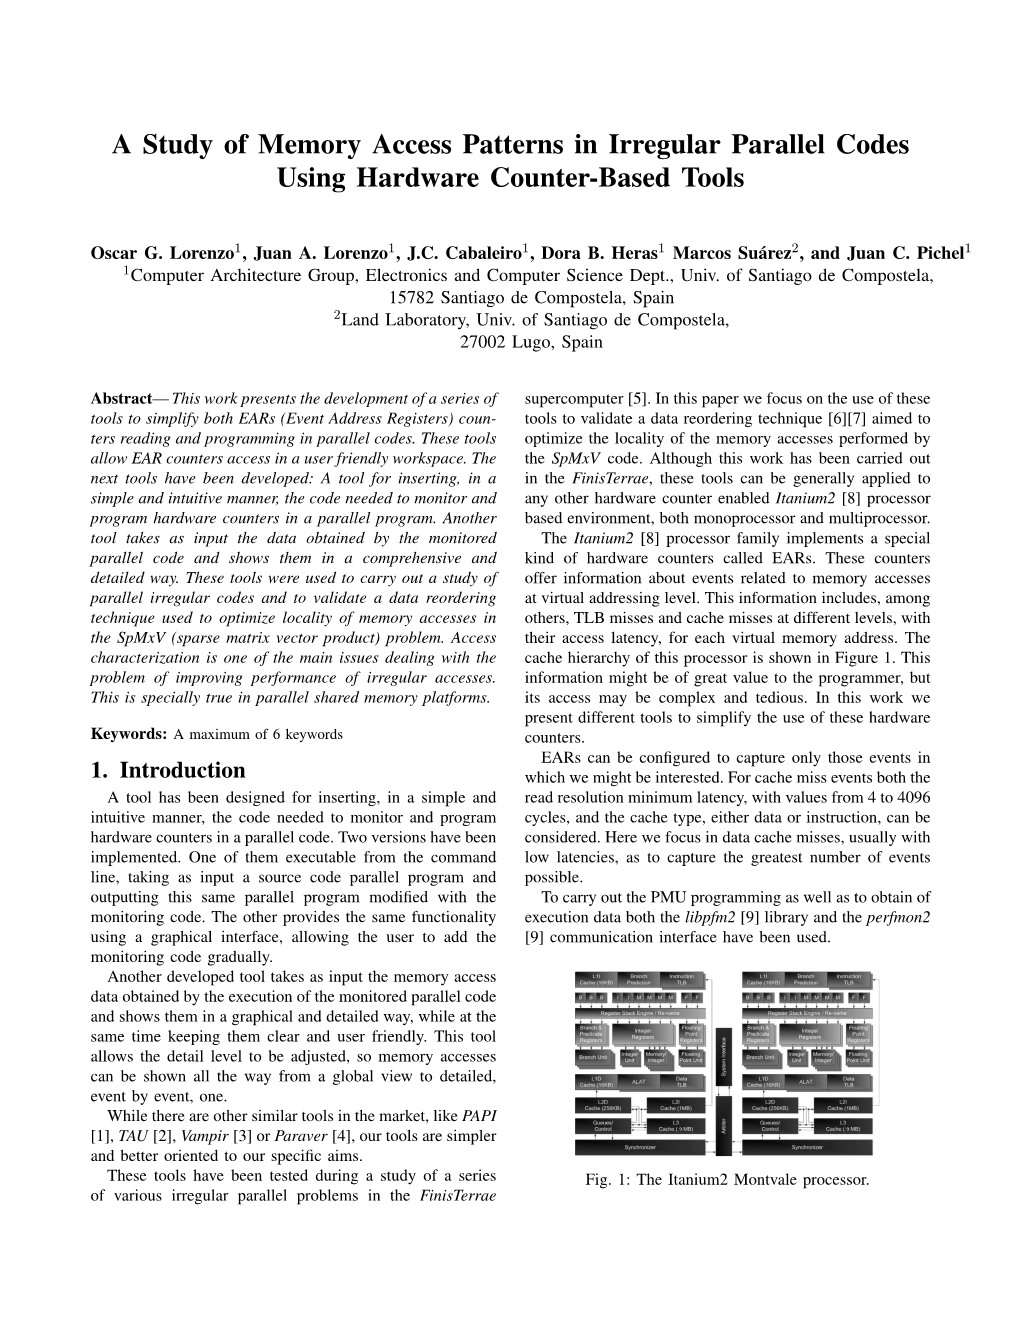 A Study of Memory Access Patterns in Irregular Parallel Codes Using Hardware Counter-Based Tools